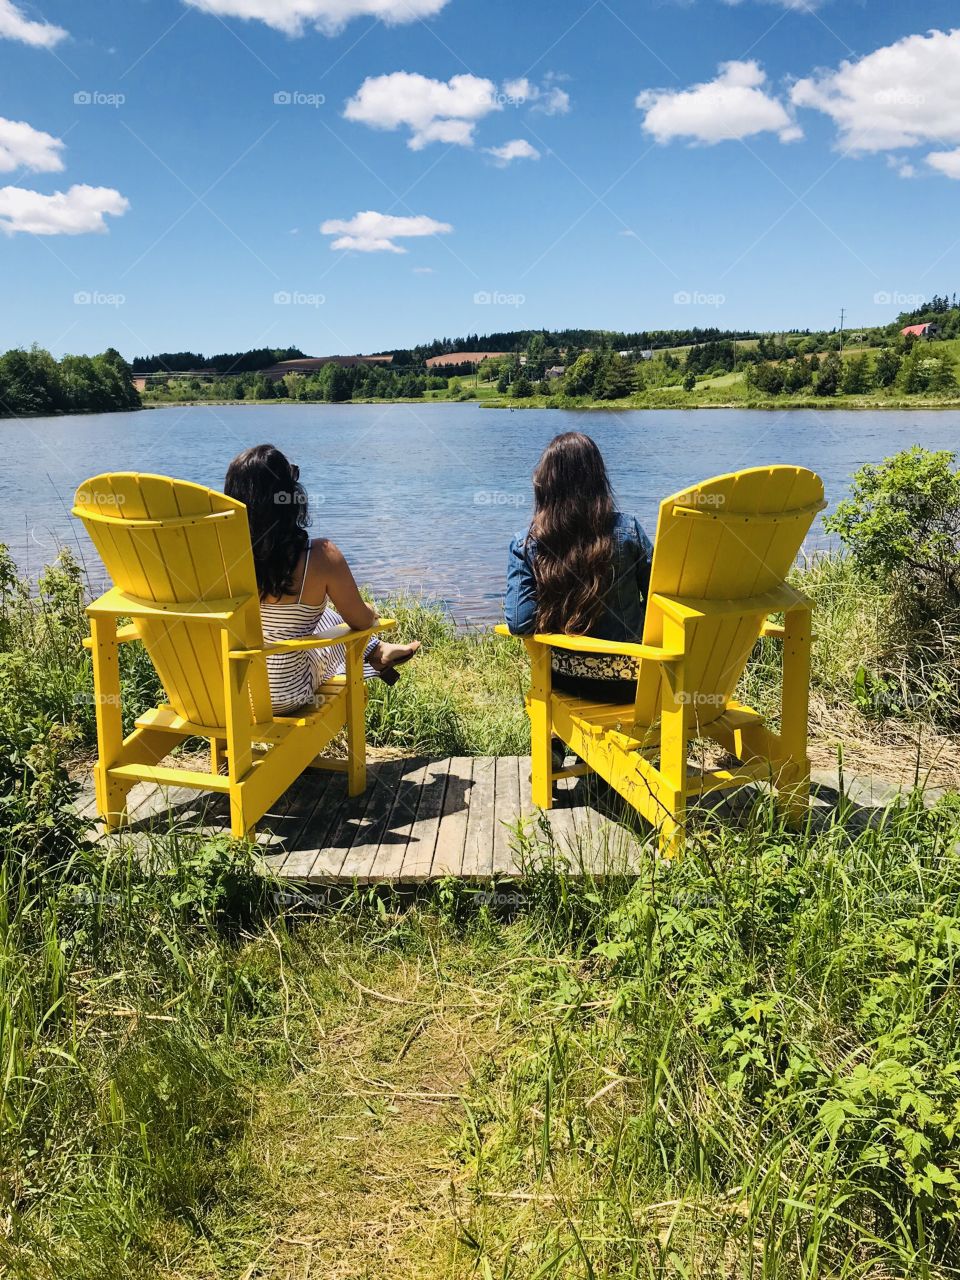 A happy picture of two fashionably dresses cousins enjoying the beautiful view of Prince Edward Island, Canada in bright yellow chairs. Surrounded by lush vegetation and bright blue skies, the whole scene captures a perfect moment of summer.